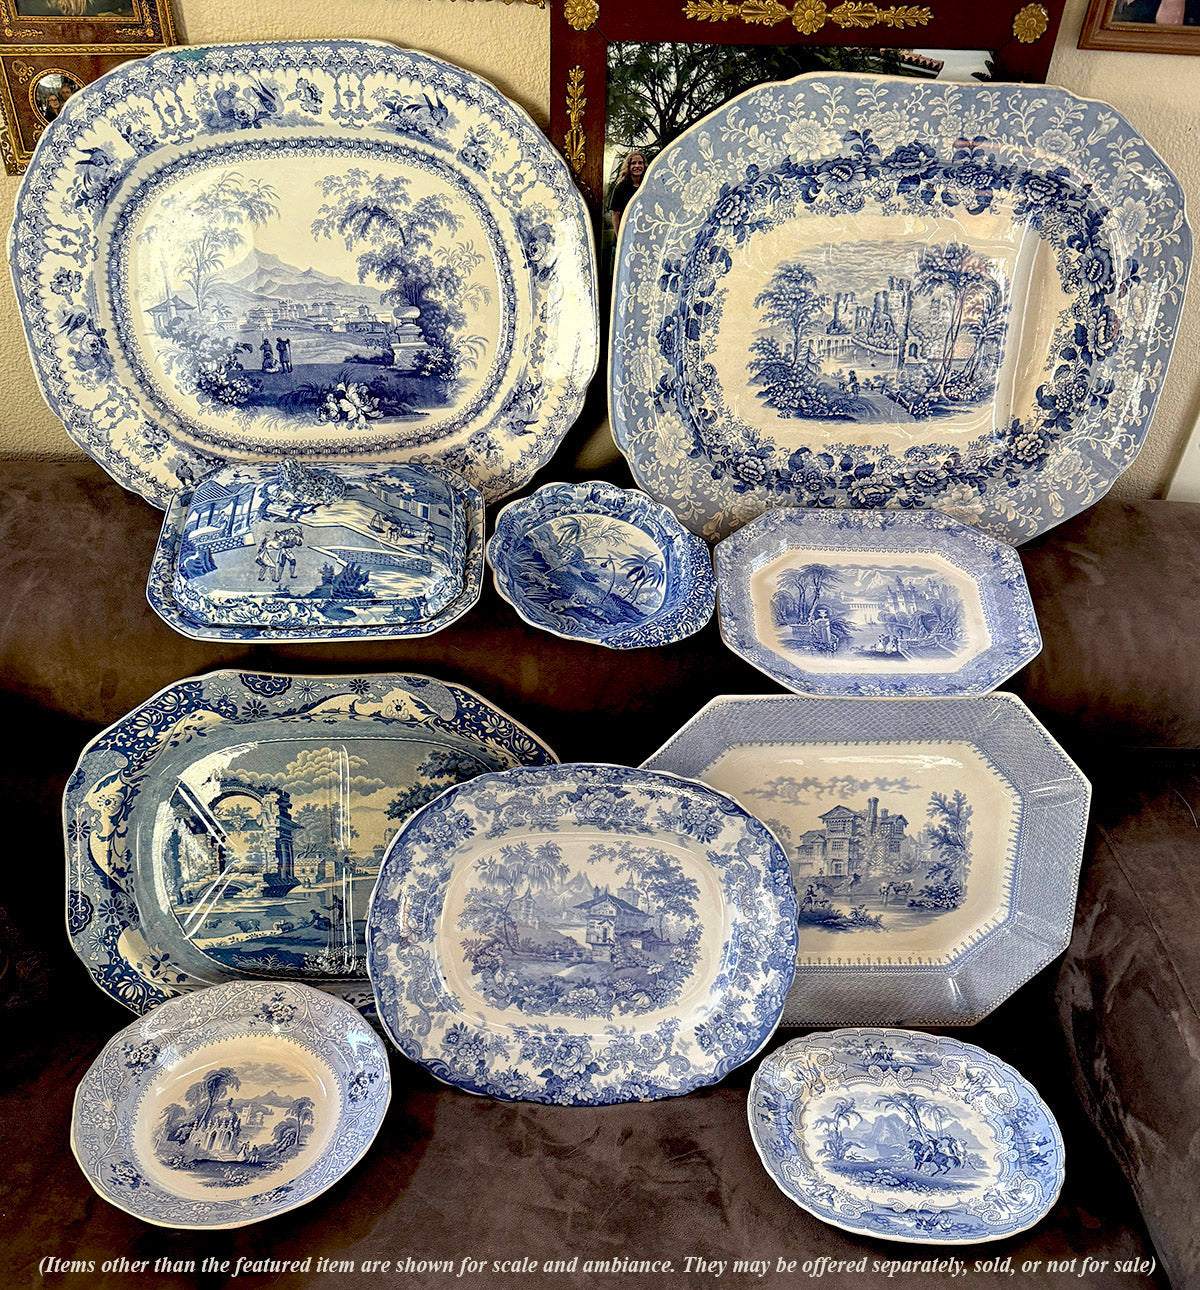 Antique c.1840 English Staffordshire 22.5" Meat or Turkey Platter, Serving Plate, Tray, Blue Transferware